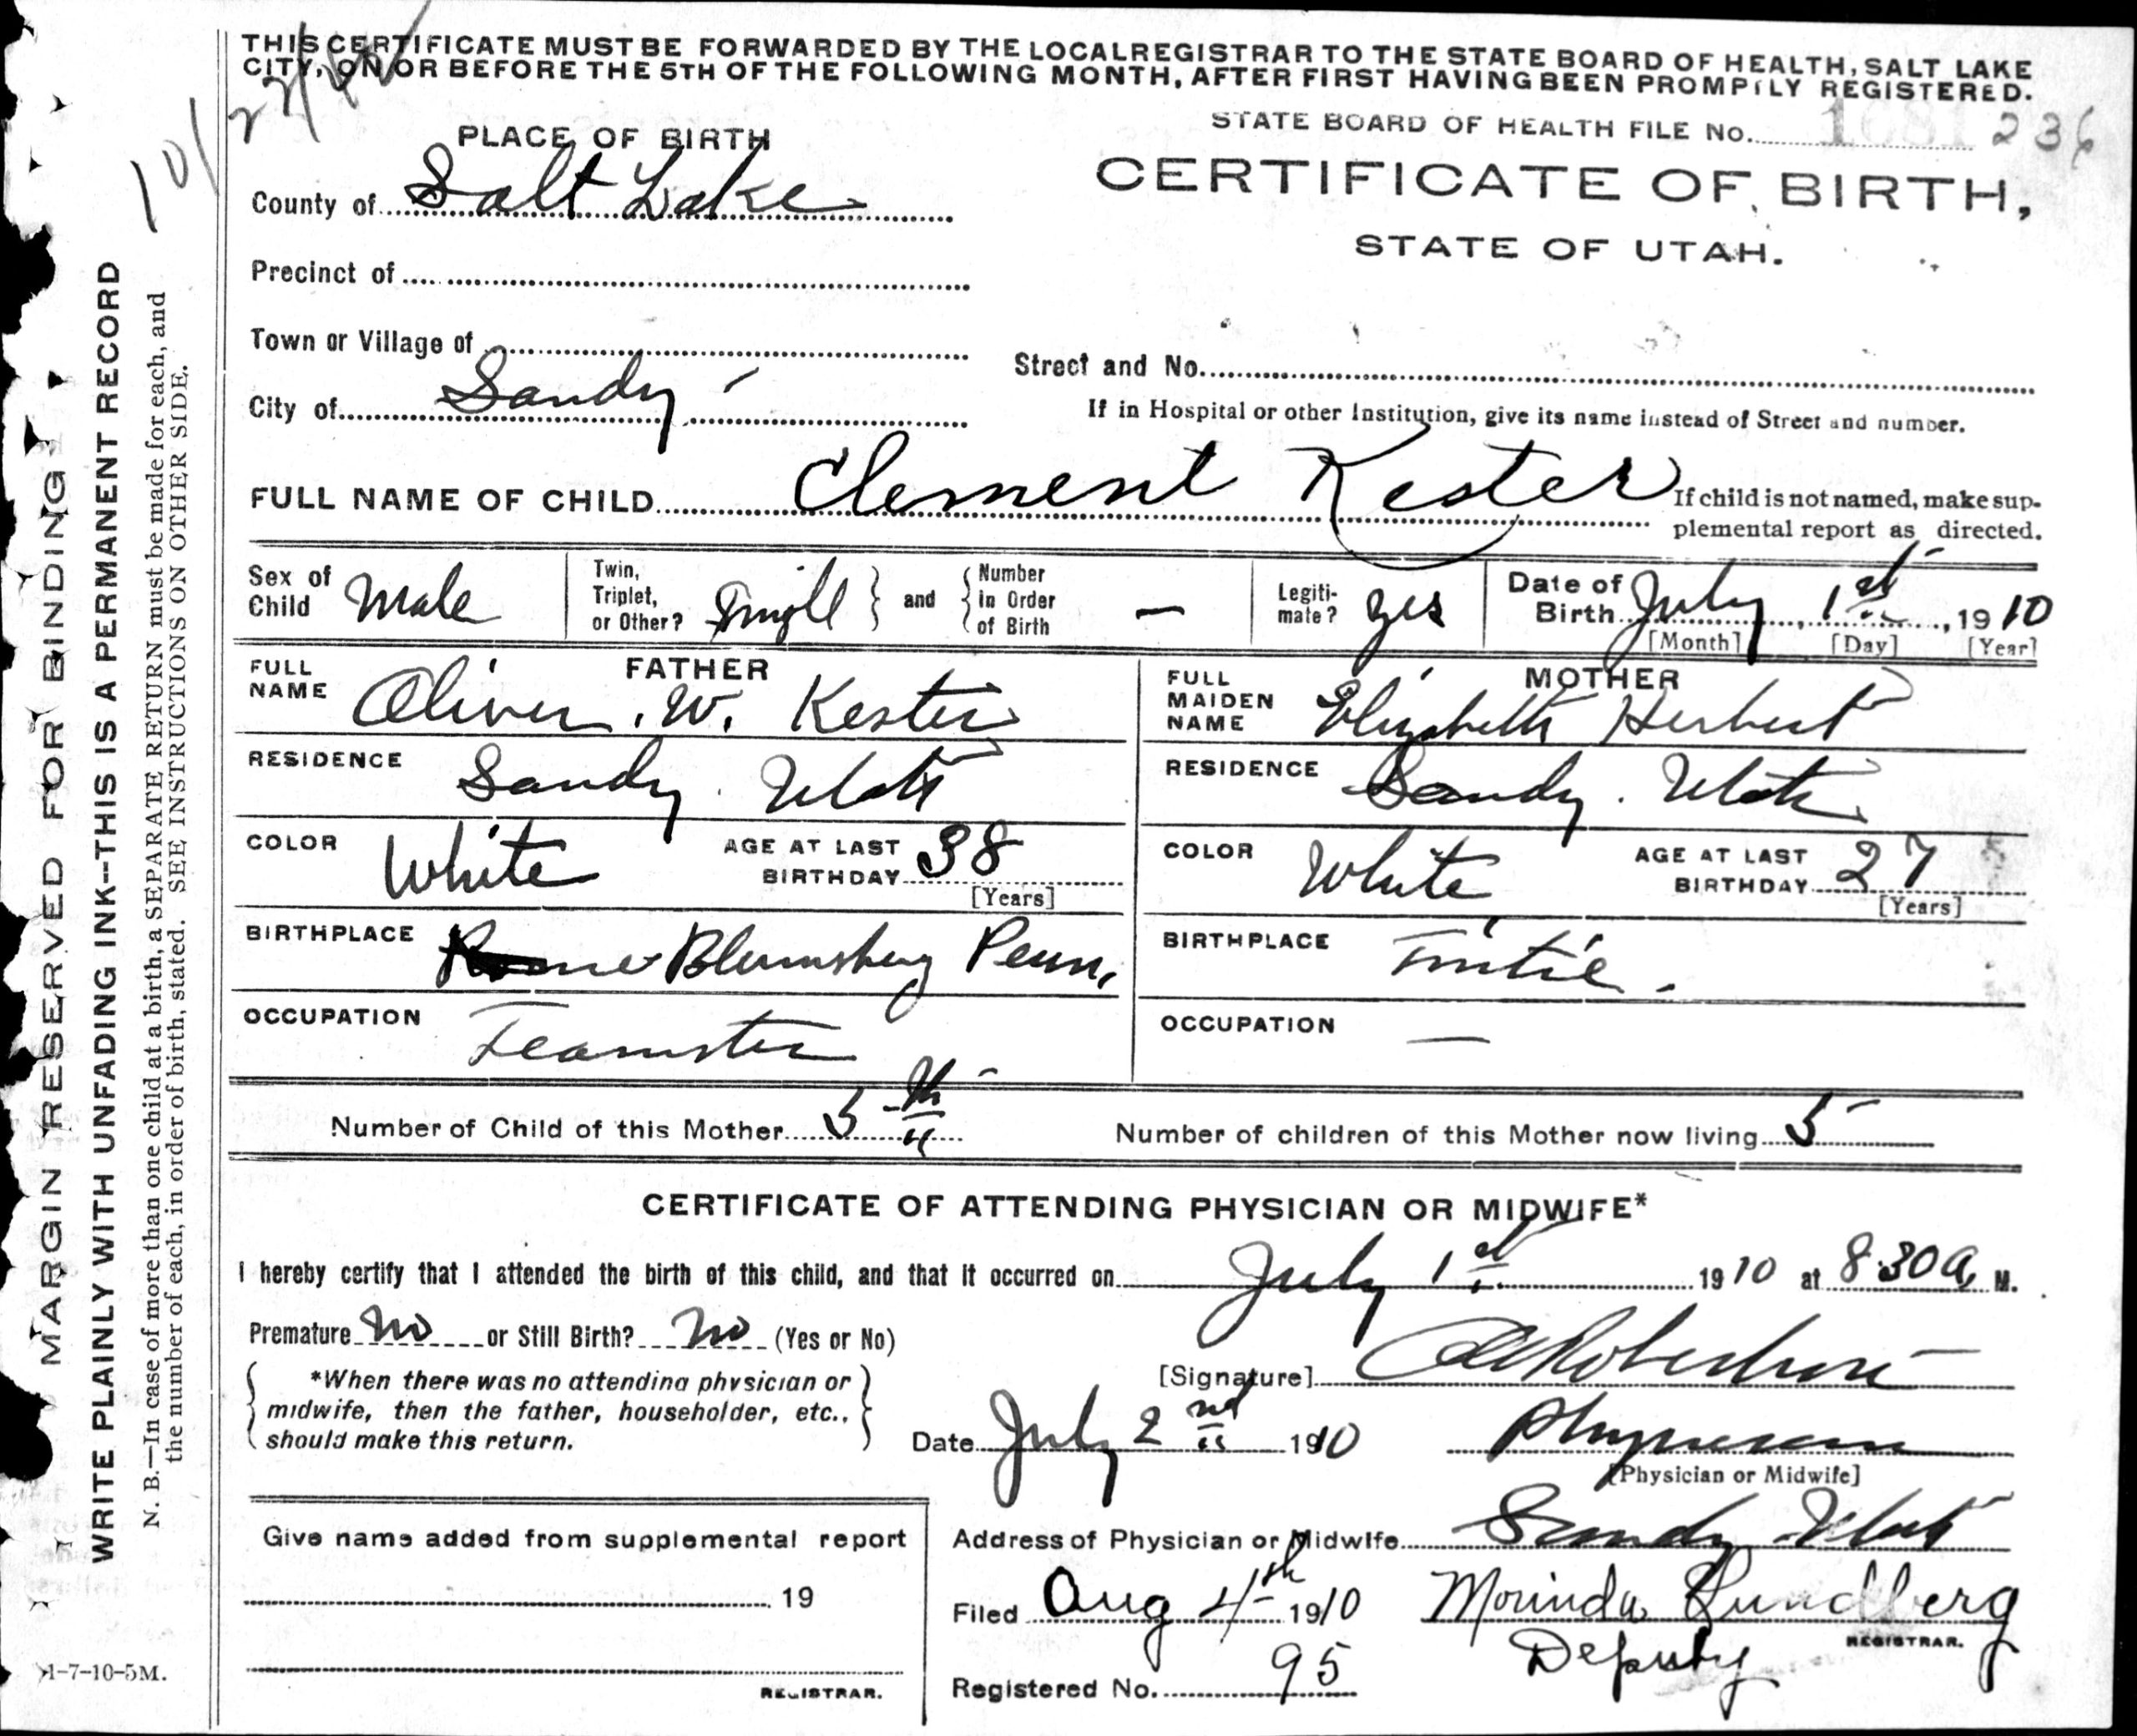 Birth certificate for Clement Kester